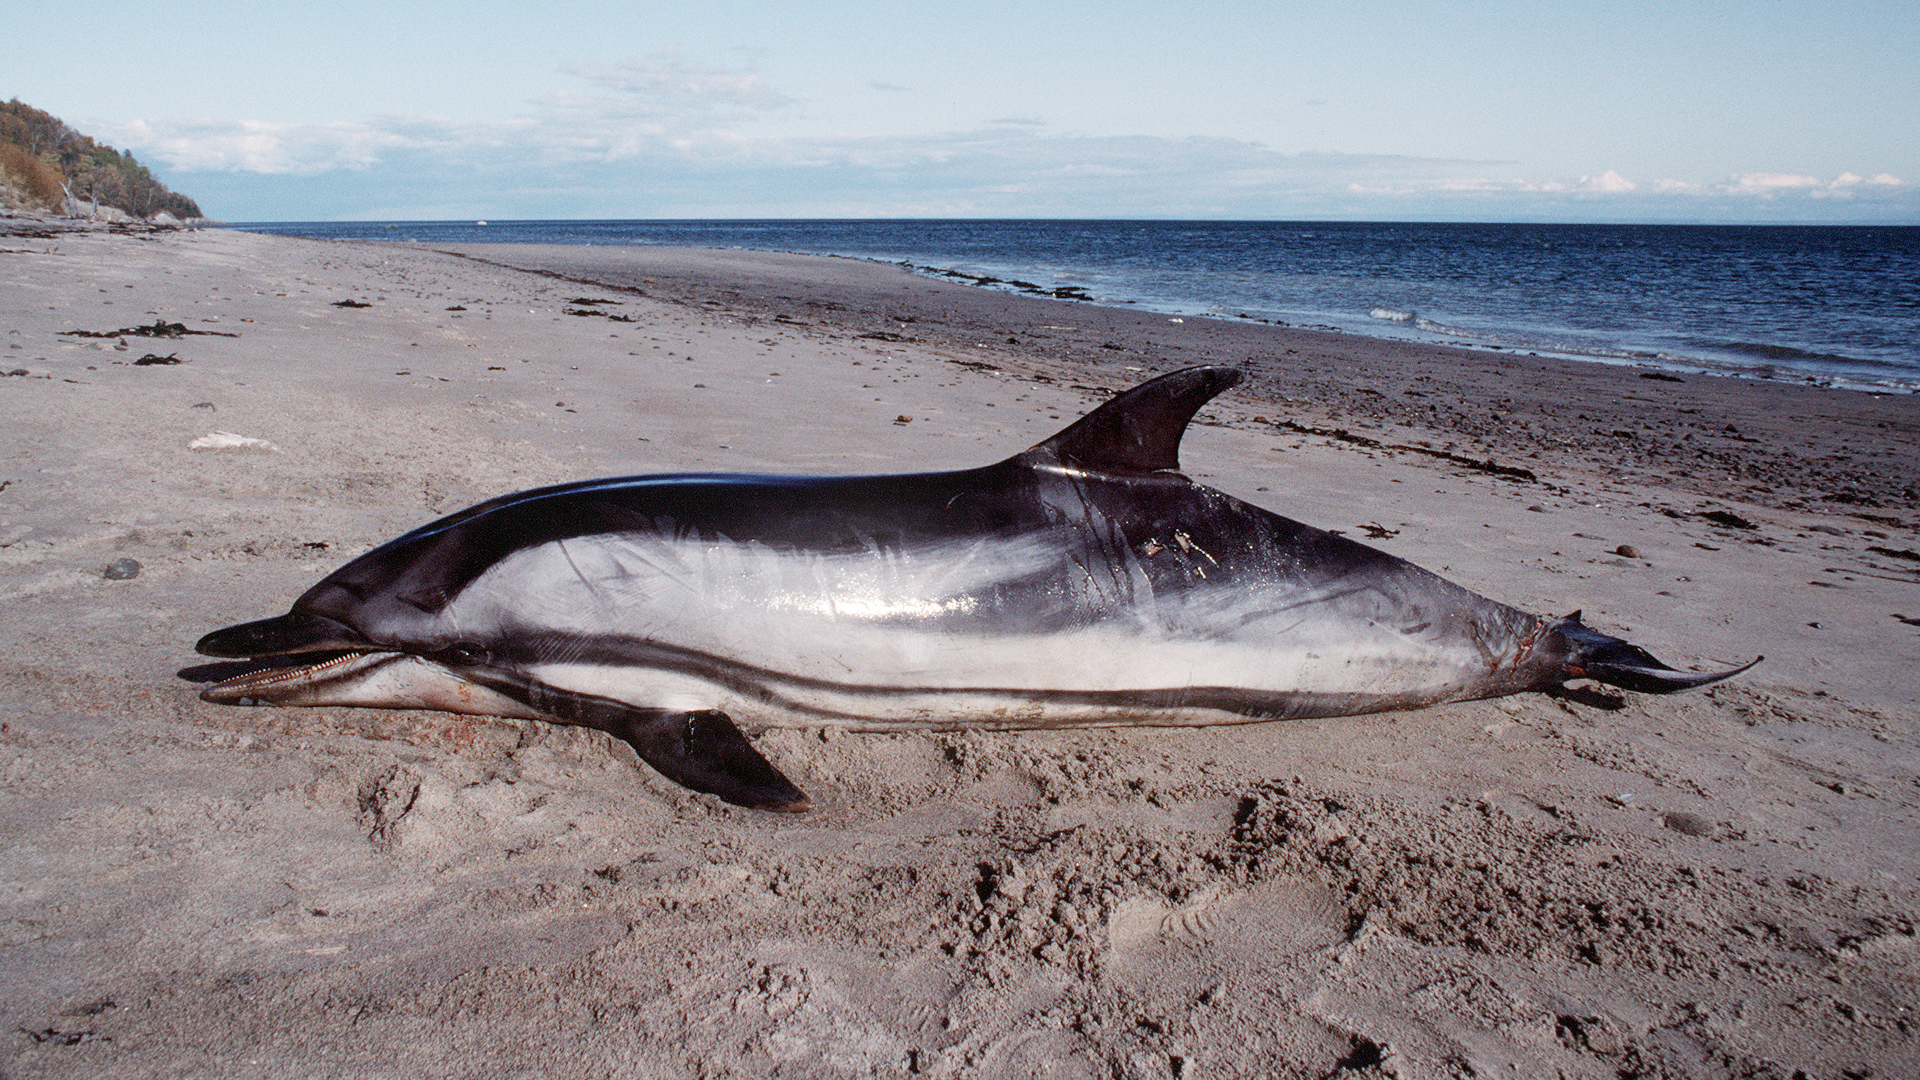 Carcass of a striped dolphin washed ashore.